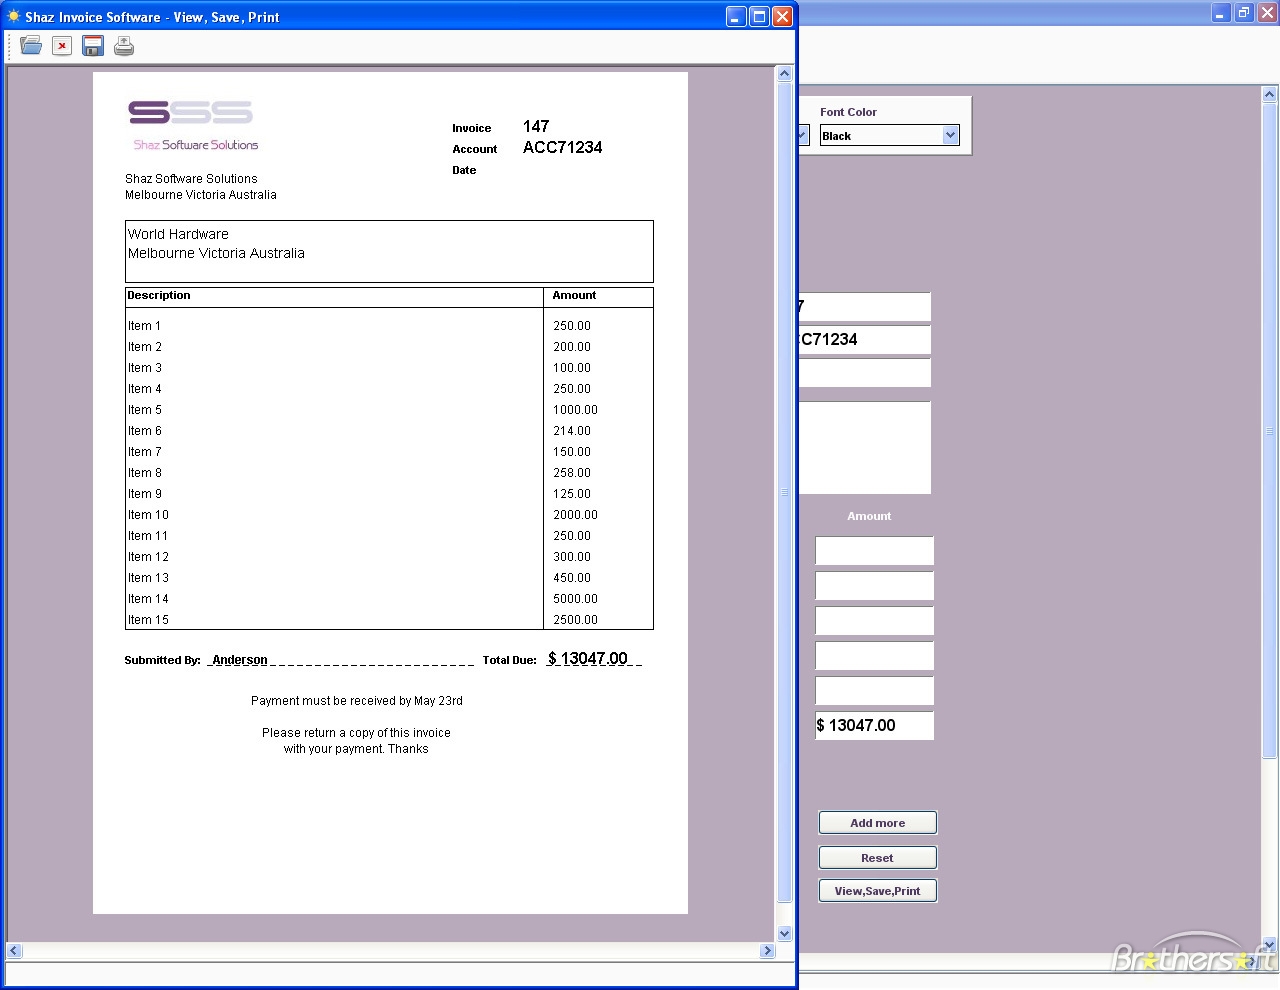 free invoice software download download free shaz invoice software shaz invoice software 100 1280 X 990